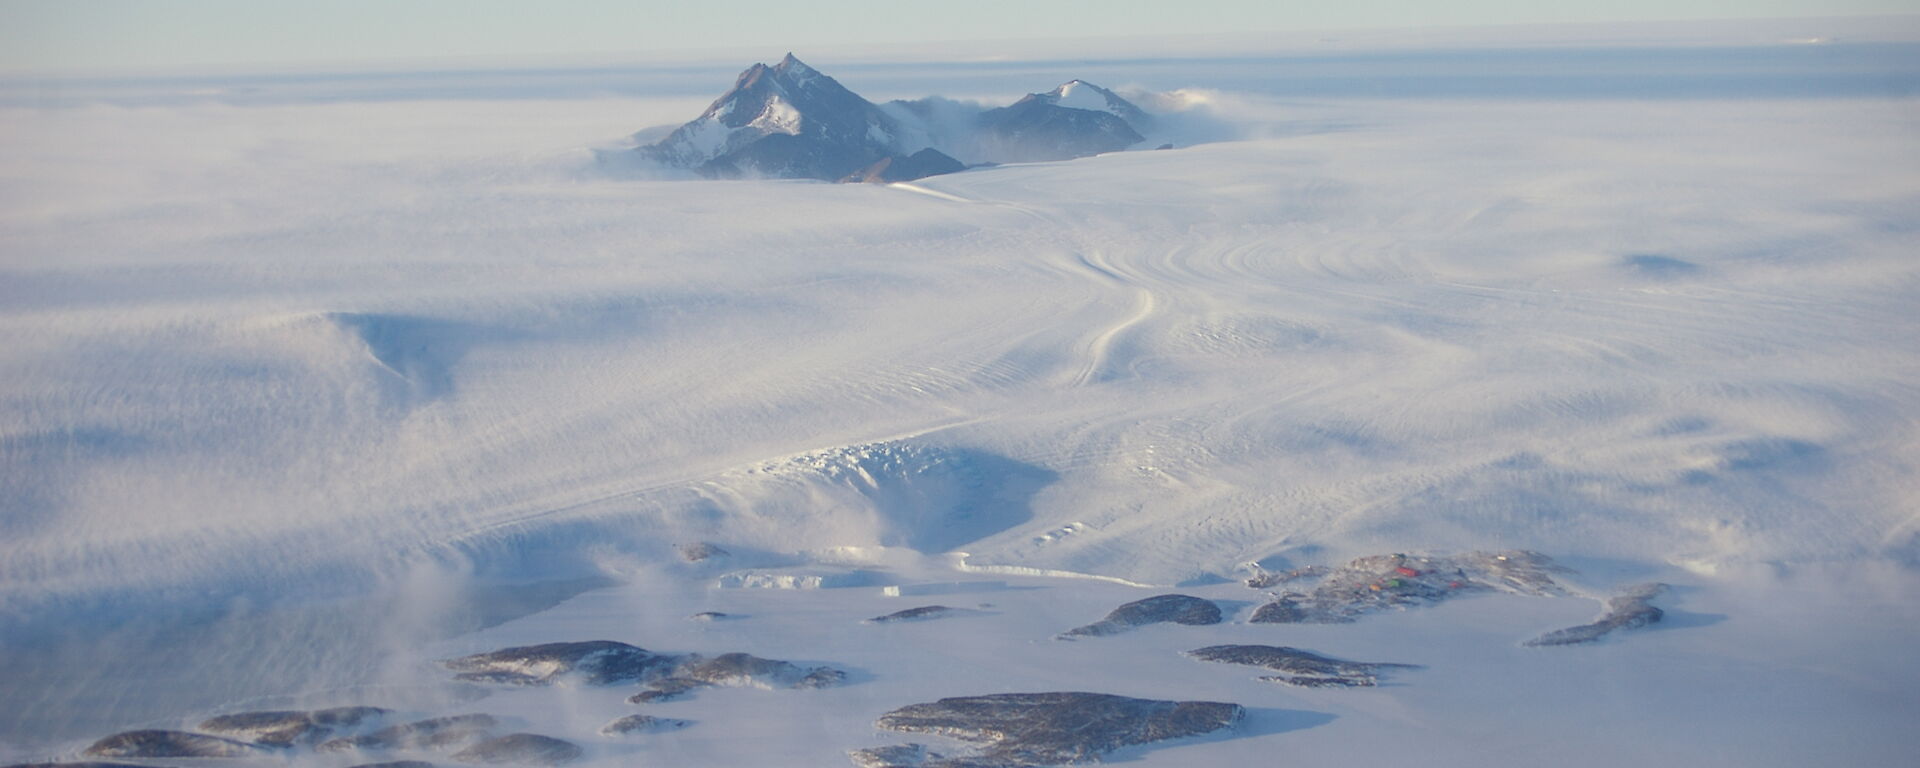 View of wind driven snow from a helicopter over rocky peaks near Mawson.